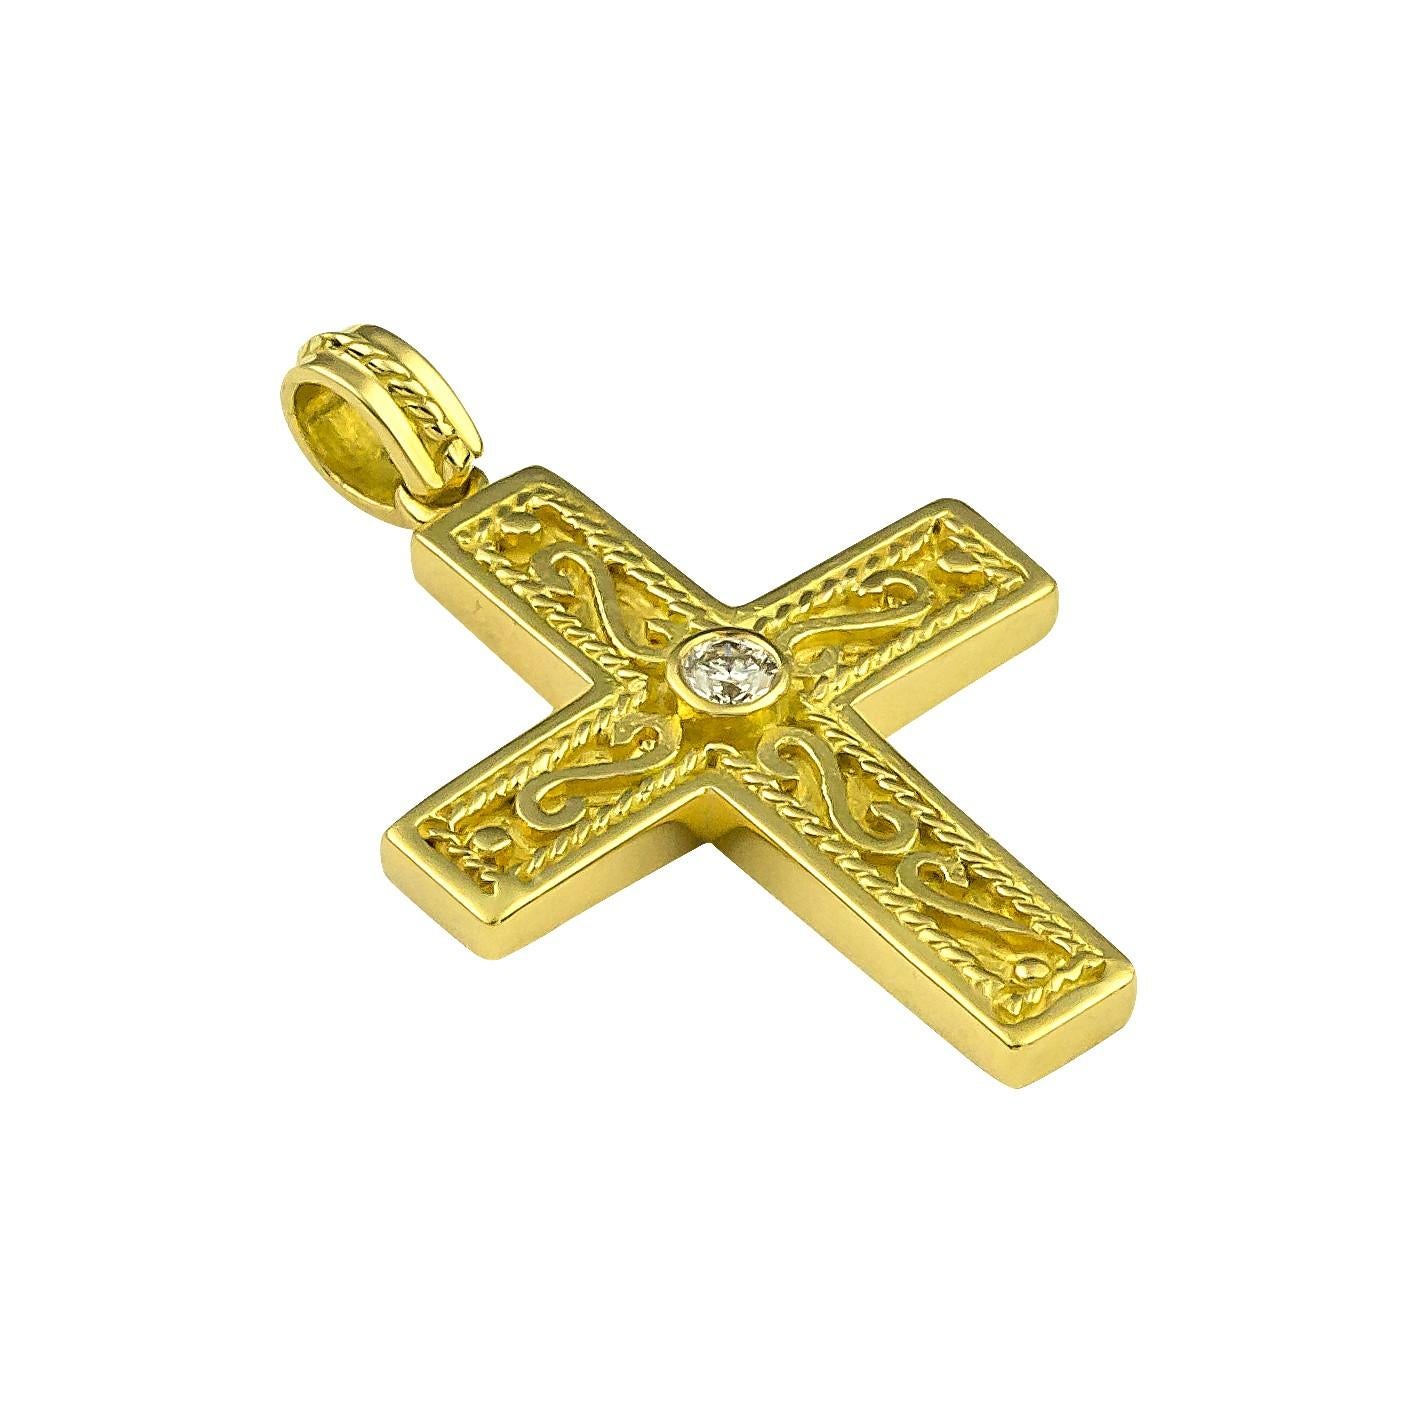 This S.Georgios designer Cross Pendant enhancer is all handmade from solid 18 Karat Yellow Gold and is microscopically decorated with granulation work all the way around. The background of the Cross has a unique velvet look and features a Brilliant